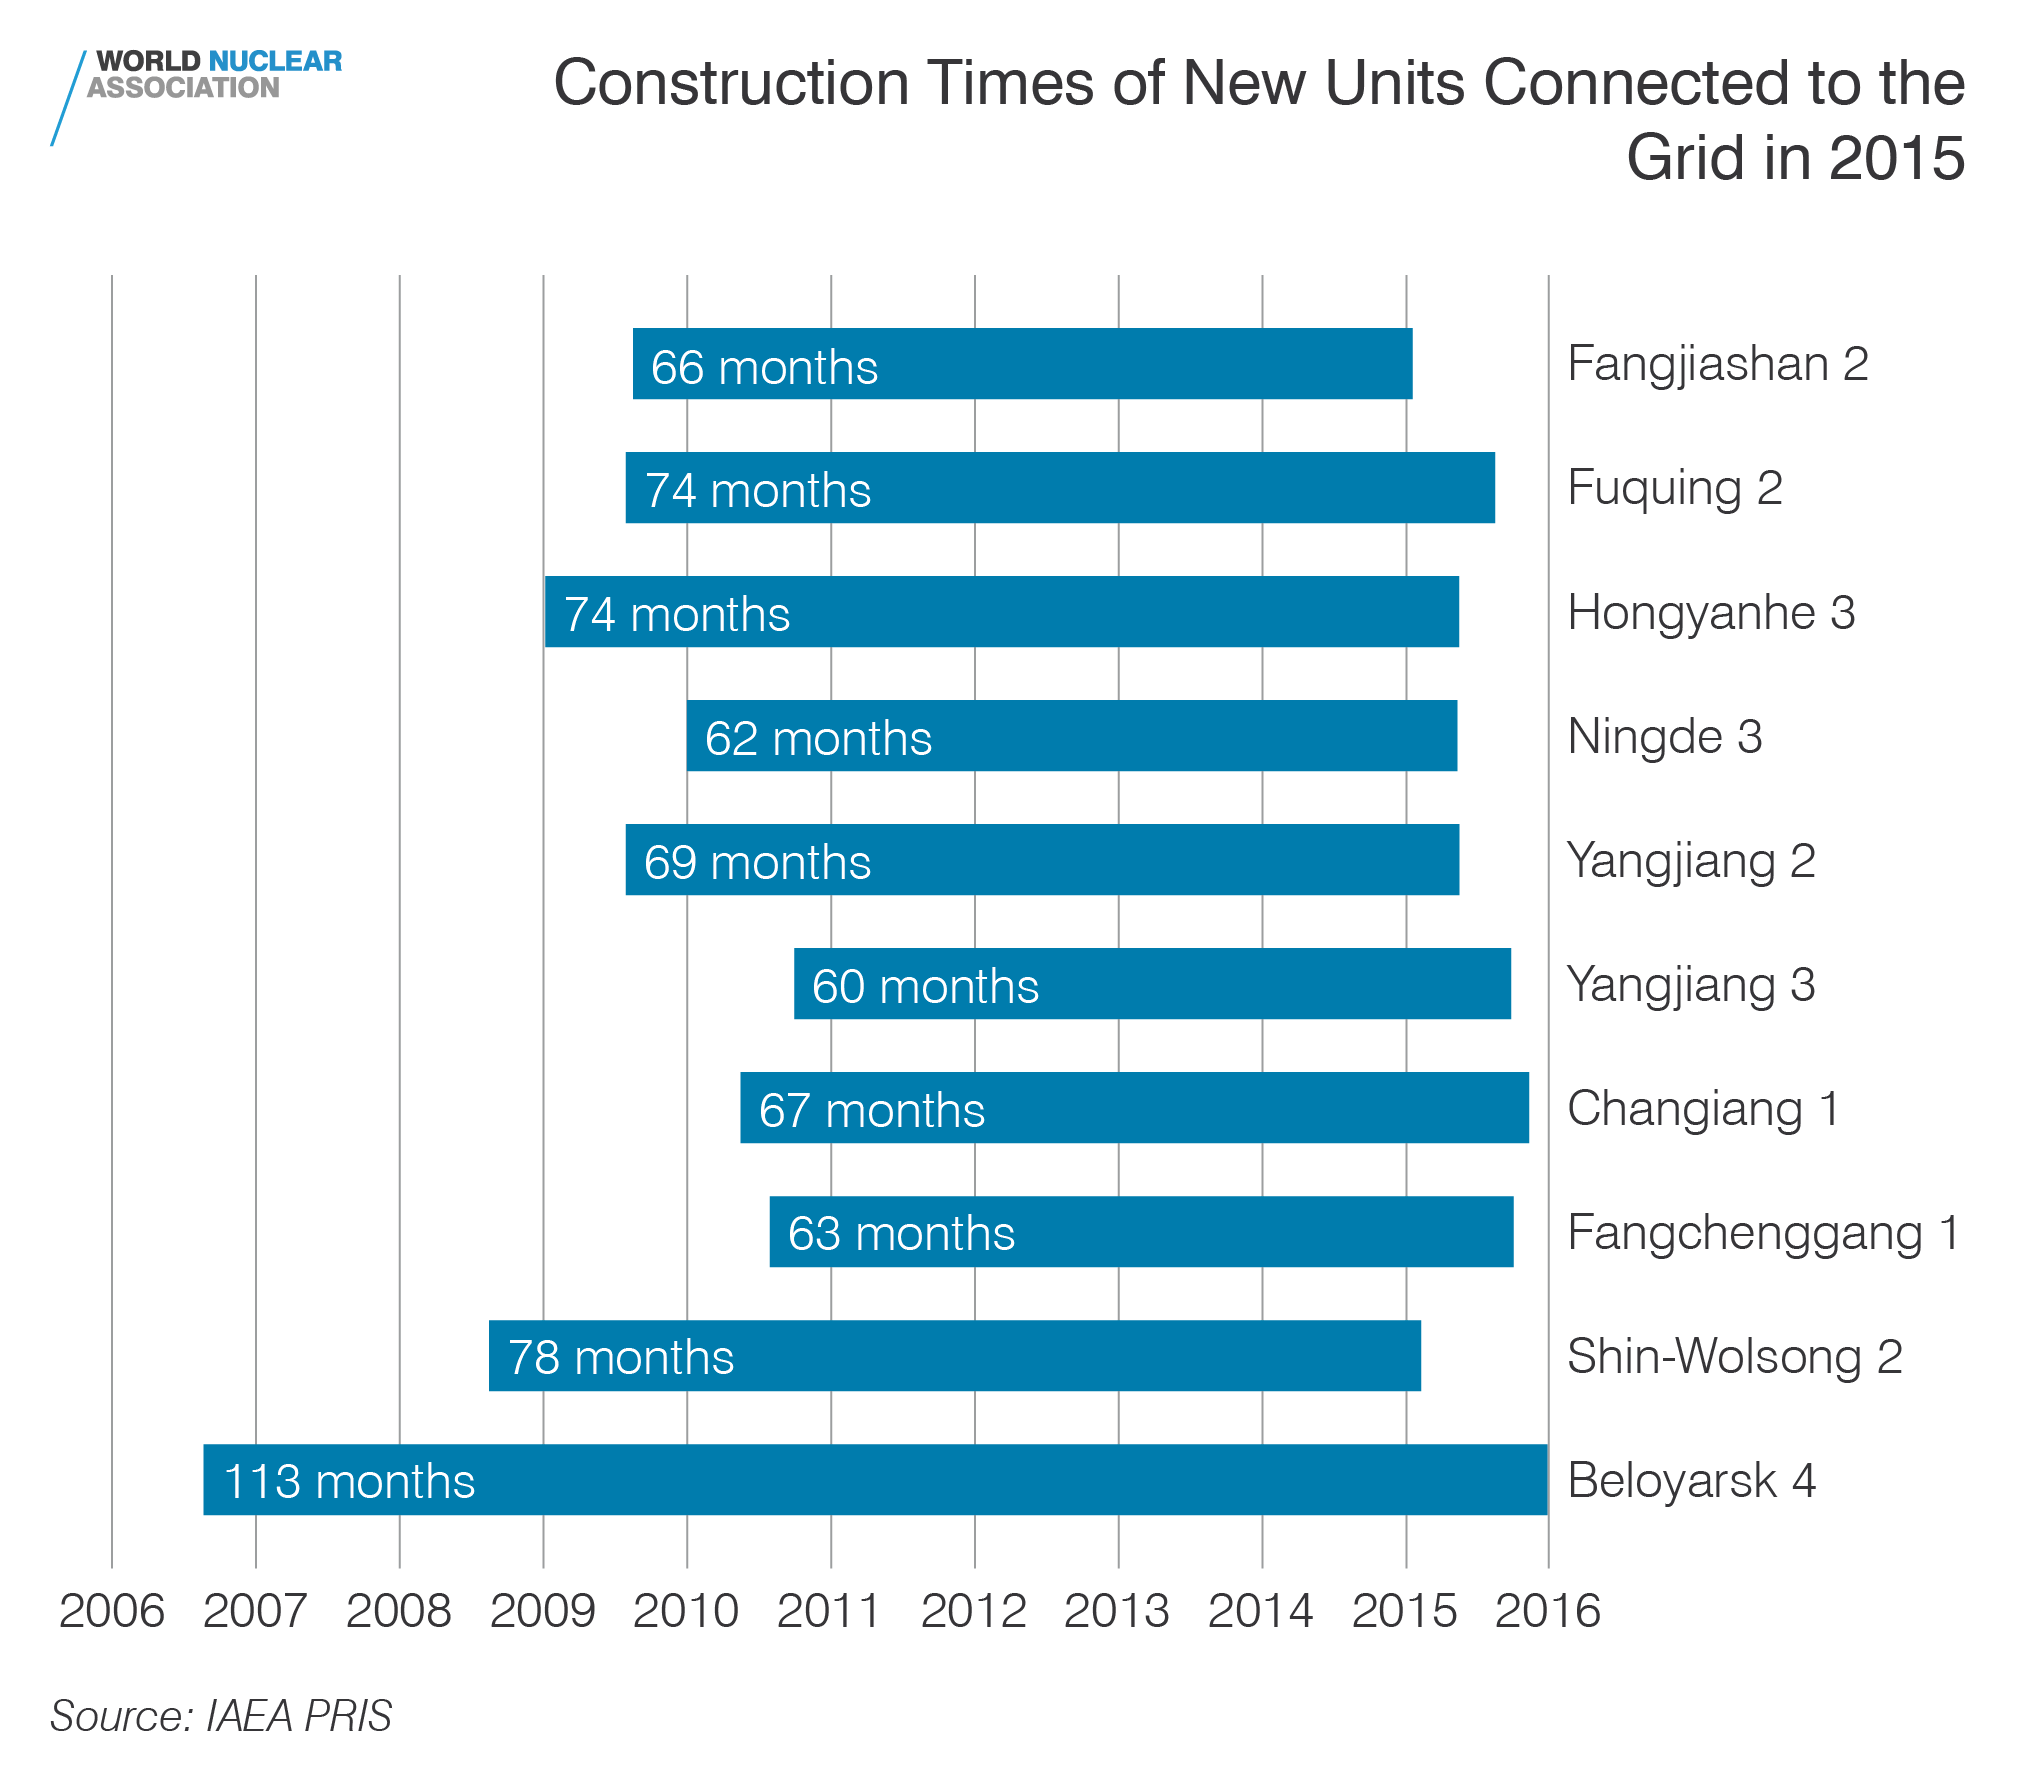 Construction times of new units connected to the grid in 2015